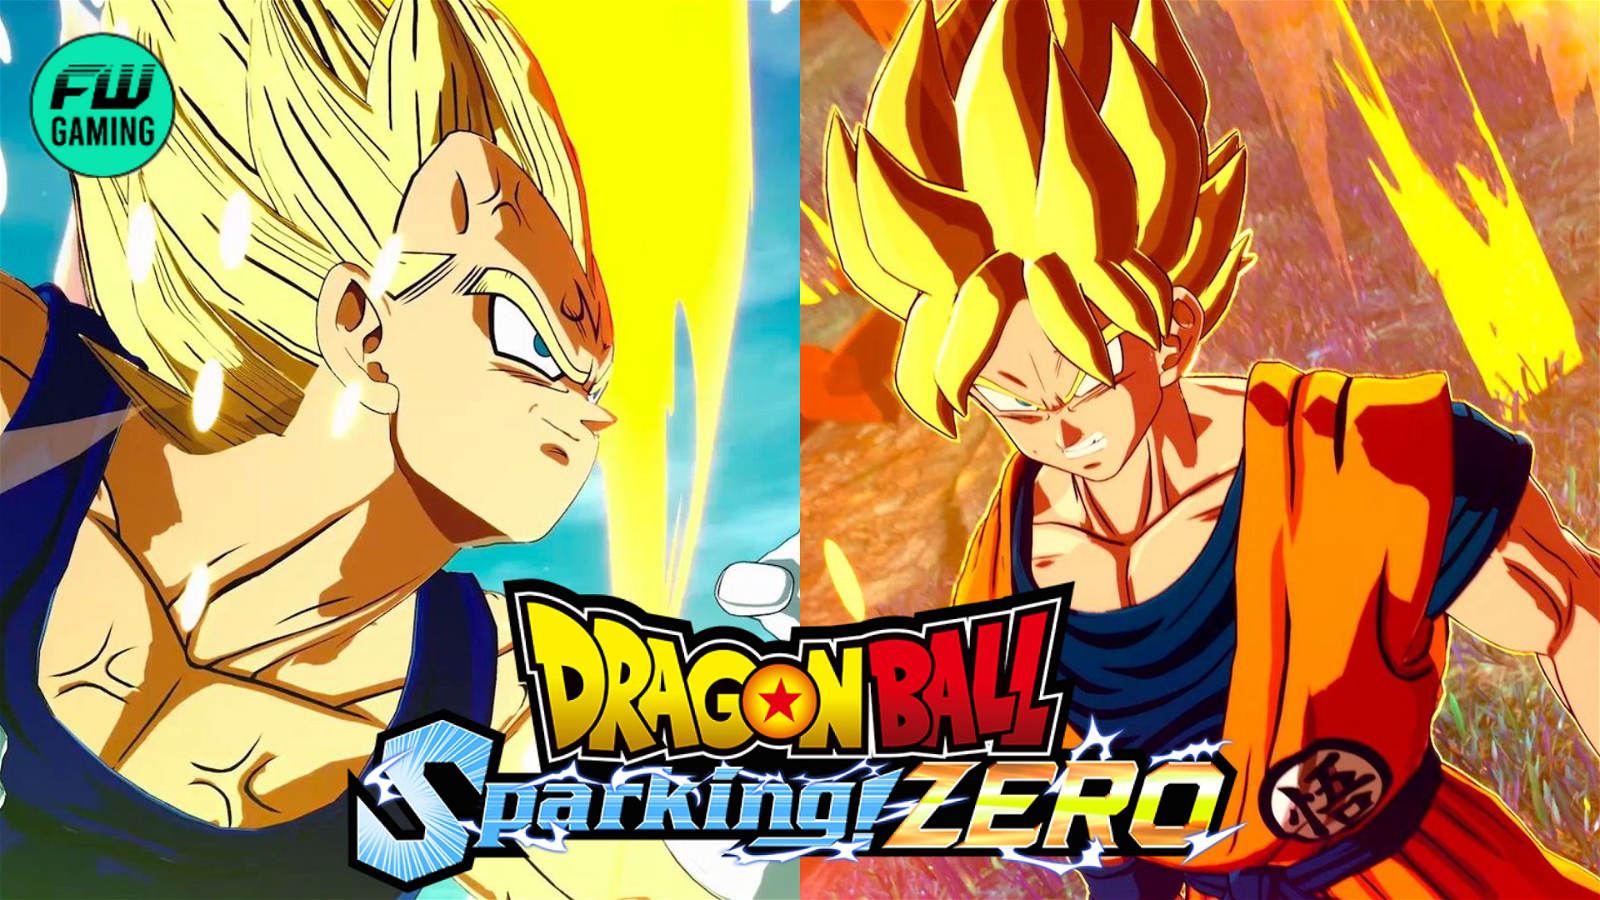 Team-Based Mechanics Are Among the Features Fans Want Most in Dragon Ball: Sparking Zero